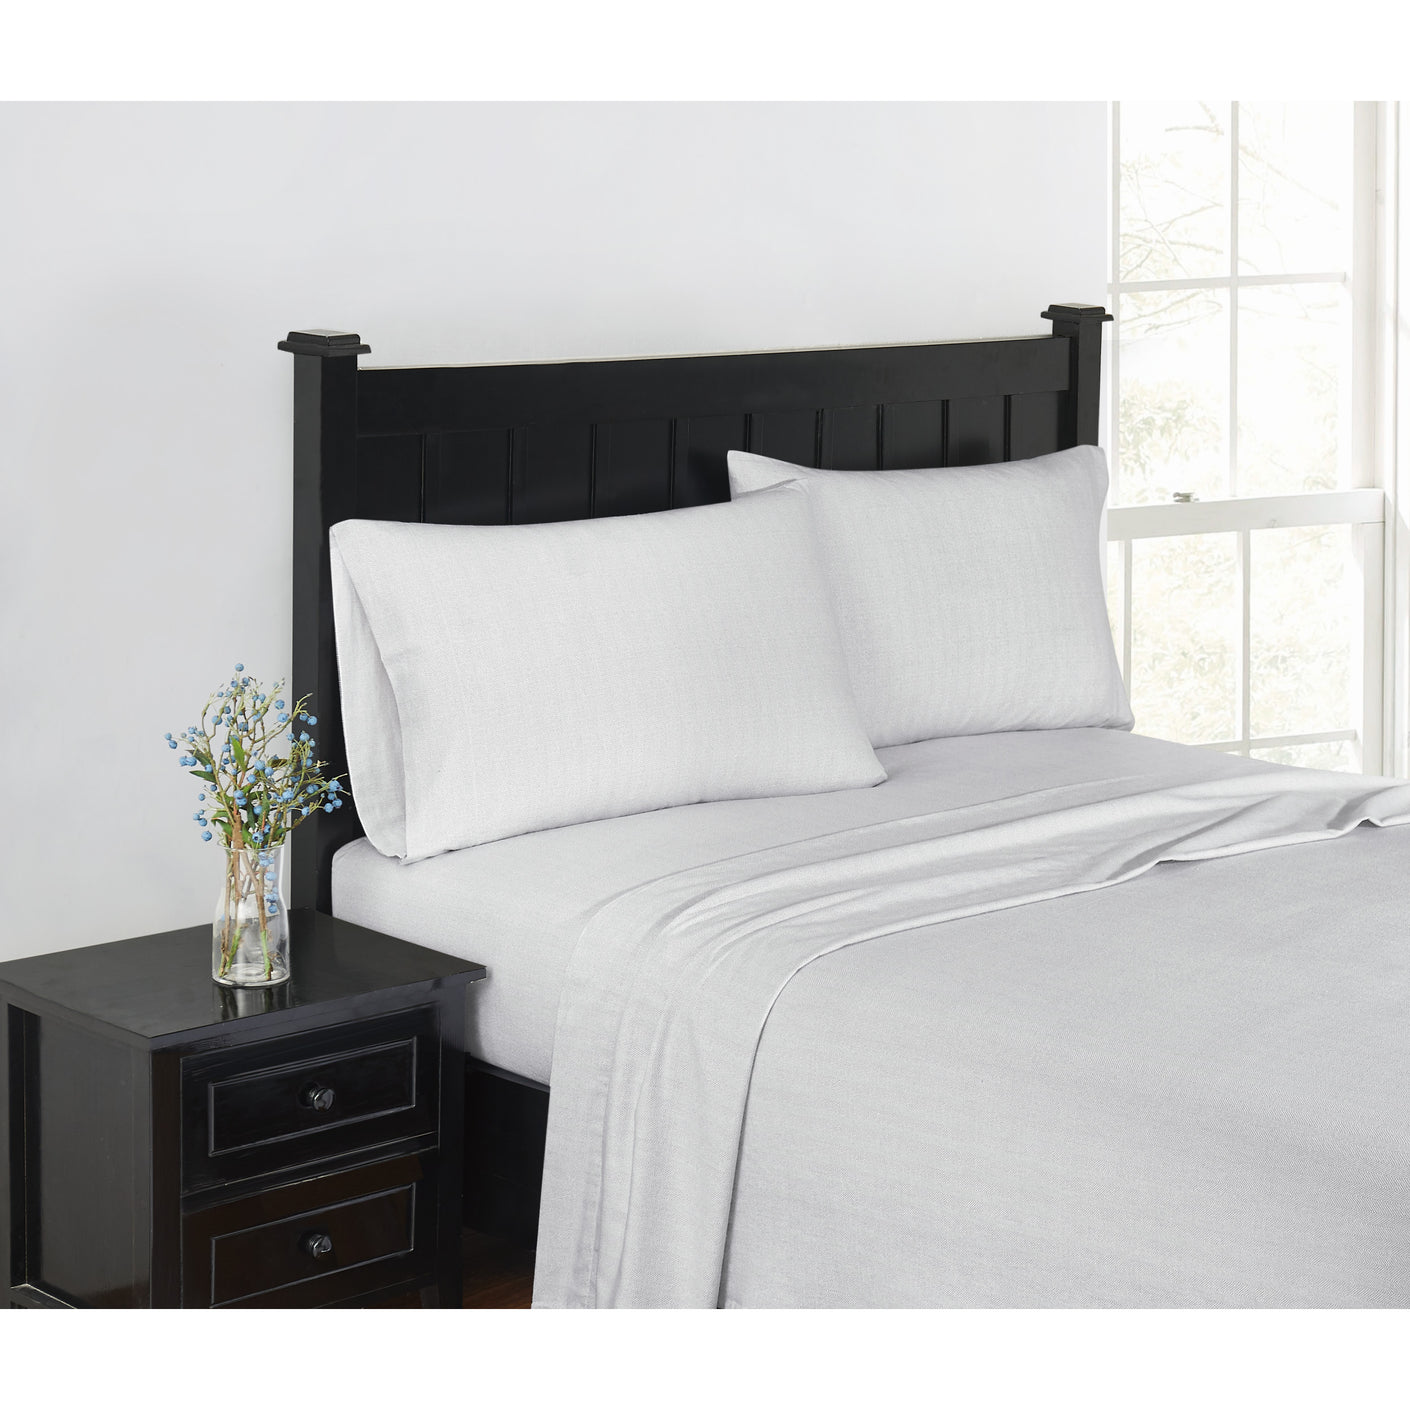 flannel beddings on a black bed